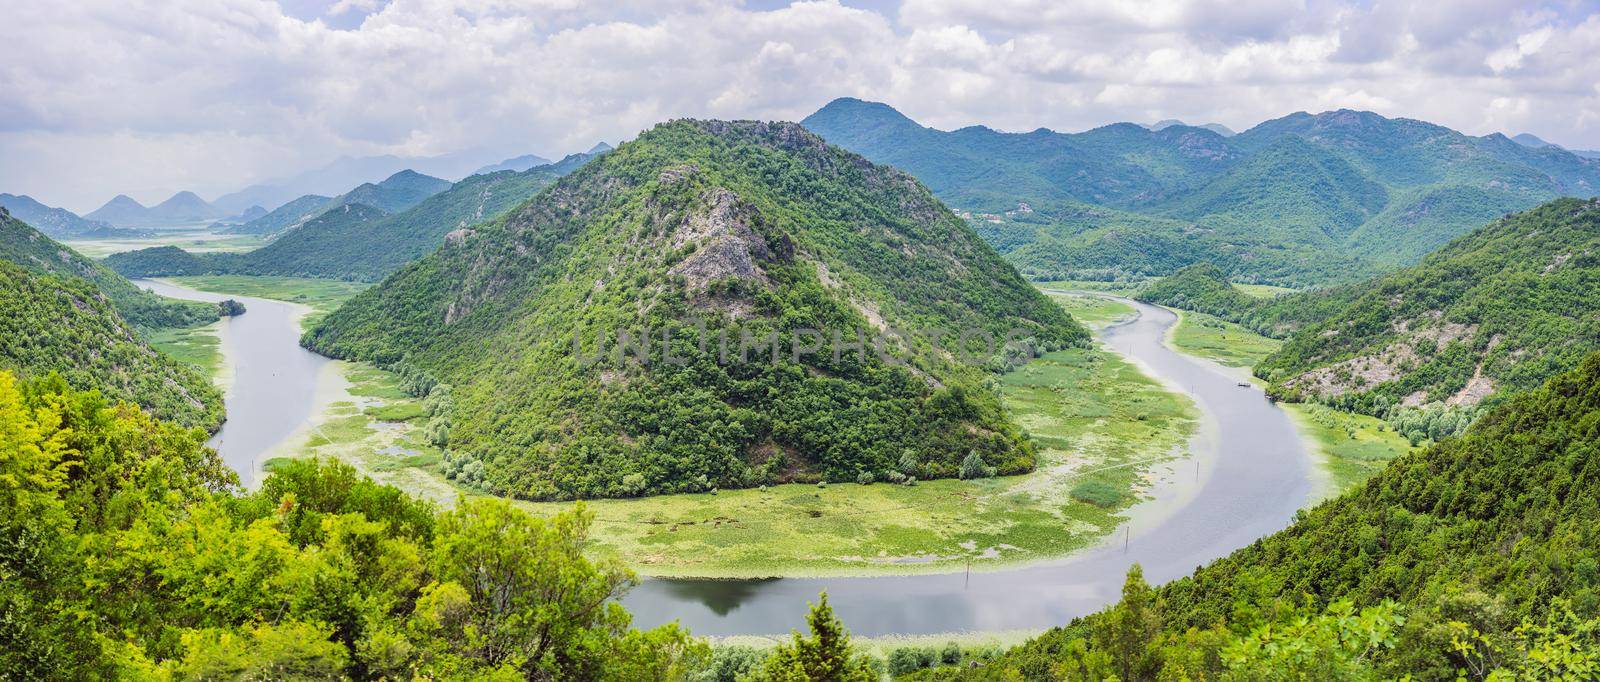 Canyon of Rijeka Crnojevica river near the Skadar lake coast. One of the most famous views of Montenegro. River makes a turn between the mountains and flows backward by galitskaya